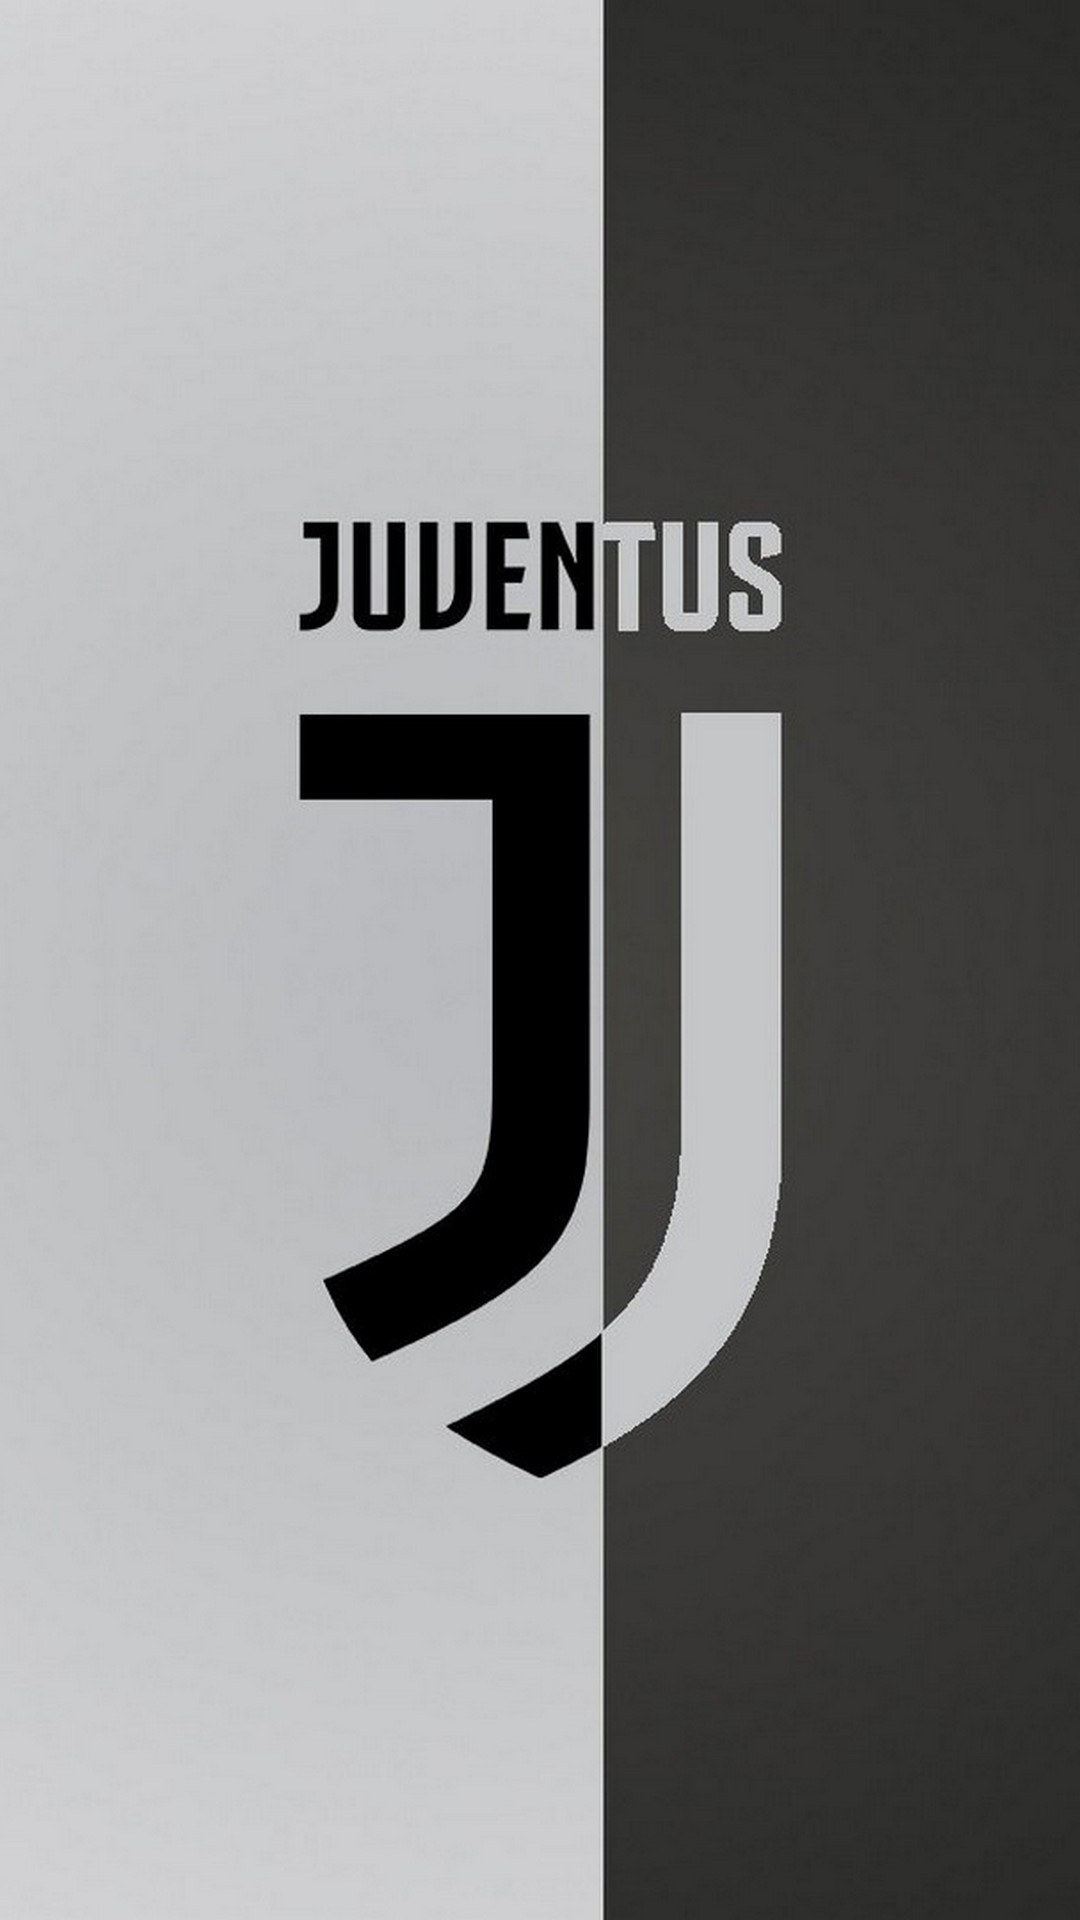 Juventus Mobile Wallpaper With Resolution 1080X1920 pixel. You can make this wallpaper for your Mac or Windows Desktop Background, iPhone, Android or Tablet and another Smartphone device for free